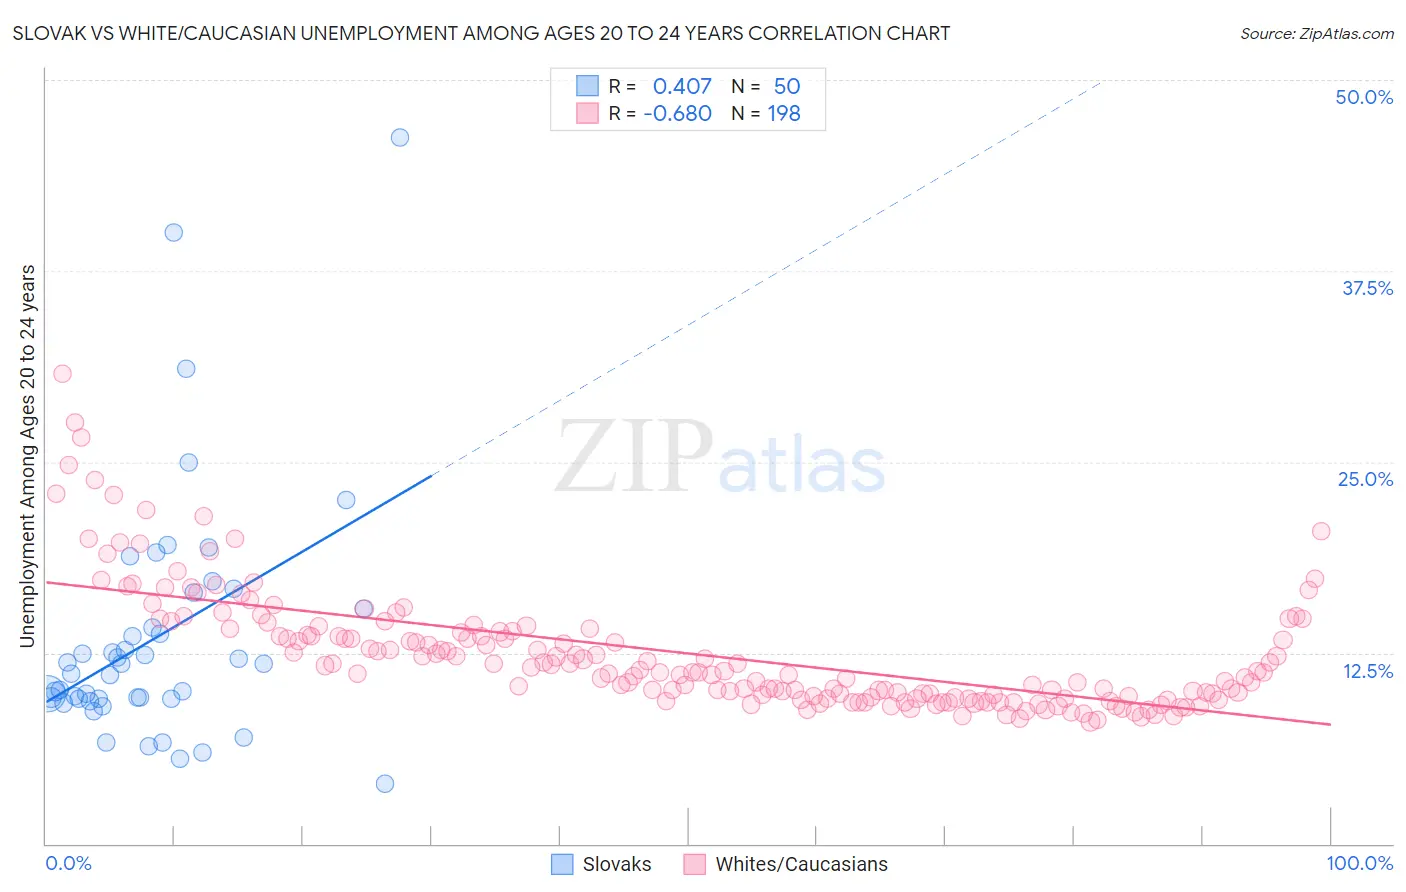 Slovak vs White/Caucasian Unemployment Among Ages 20 to 24 years